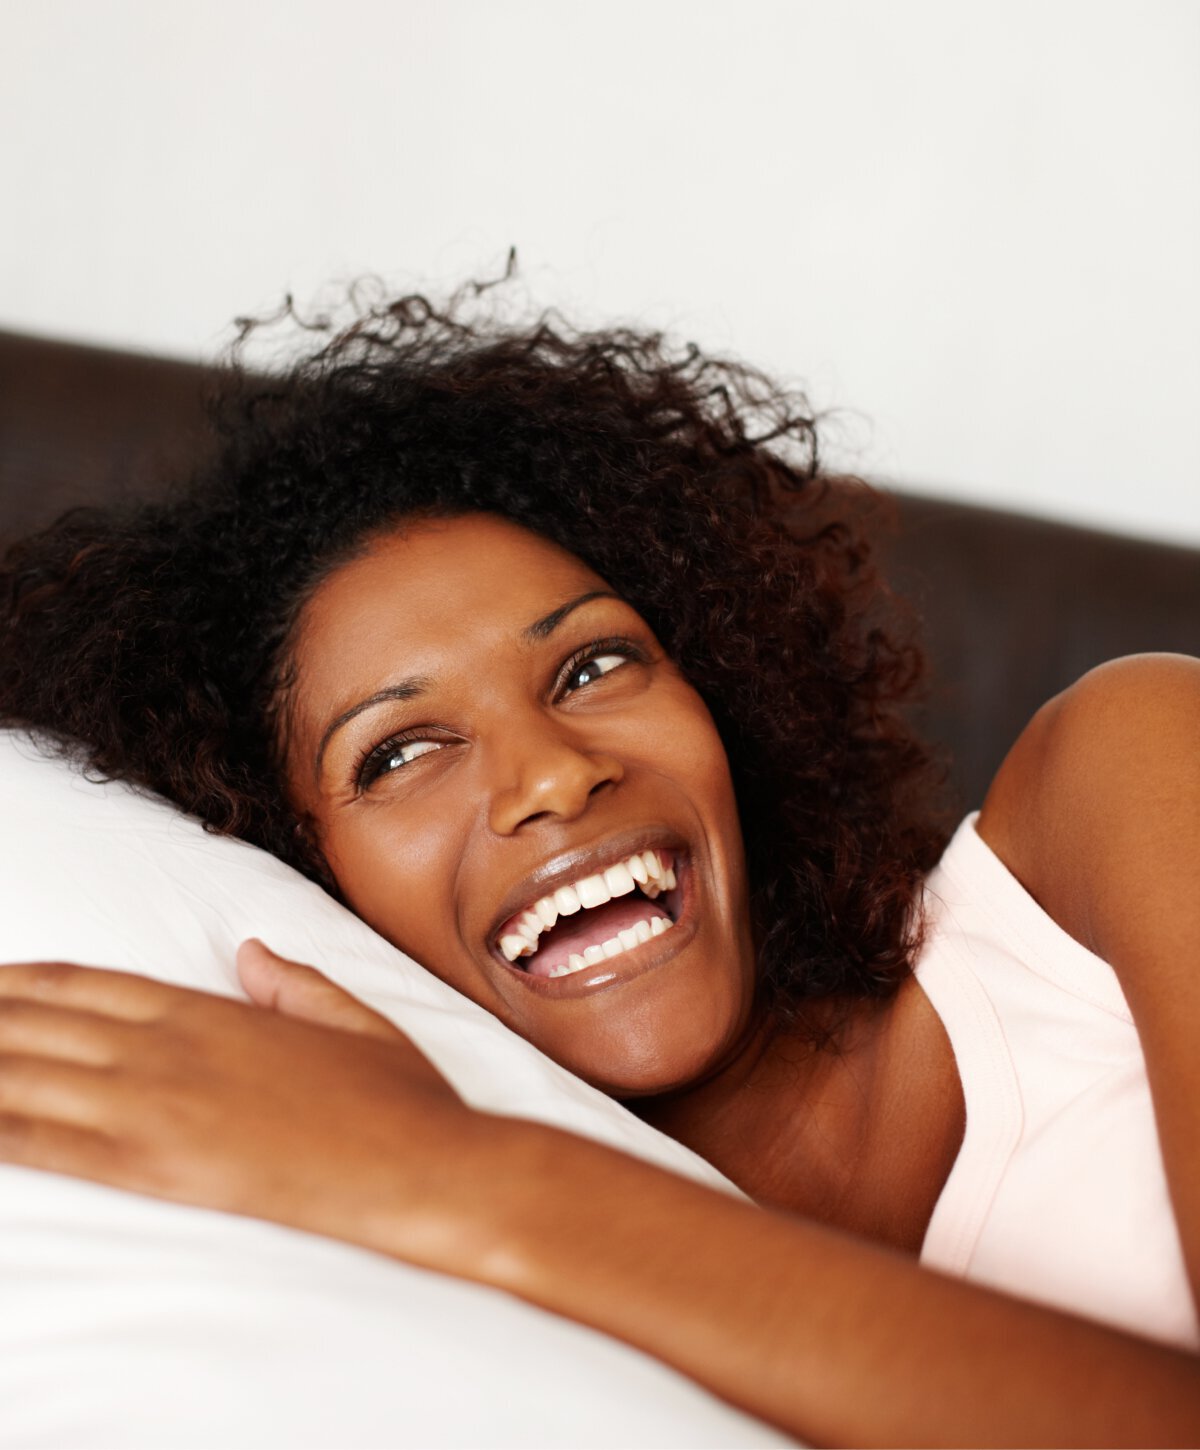 beverly hills TMJ disorder treatment patient model laughing in bed